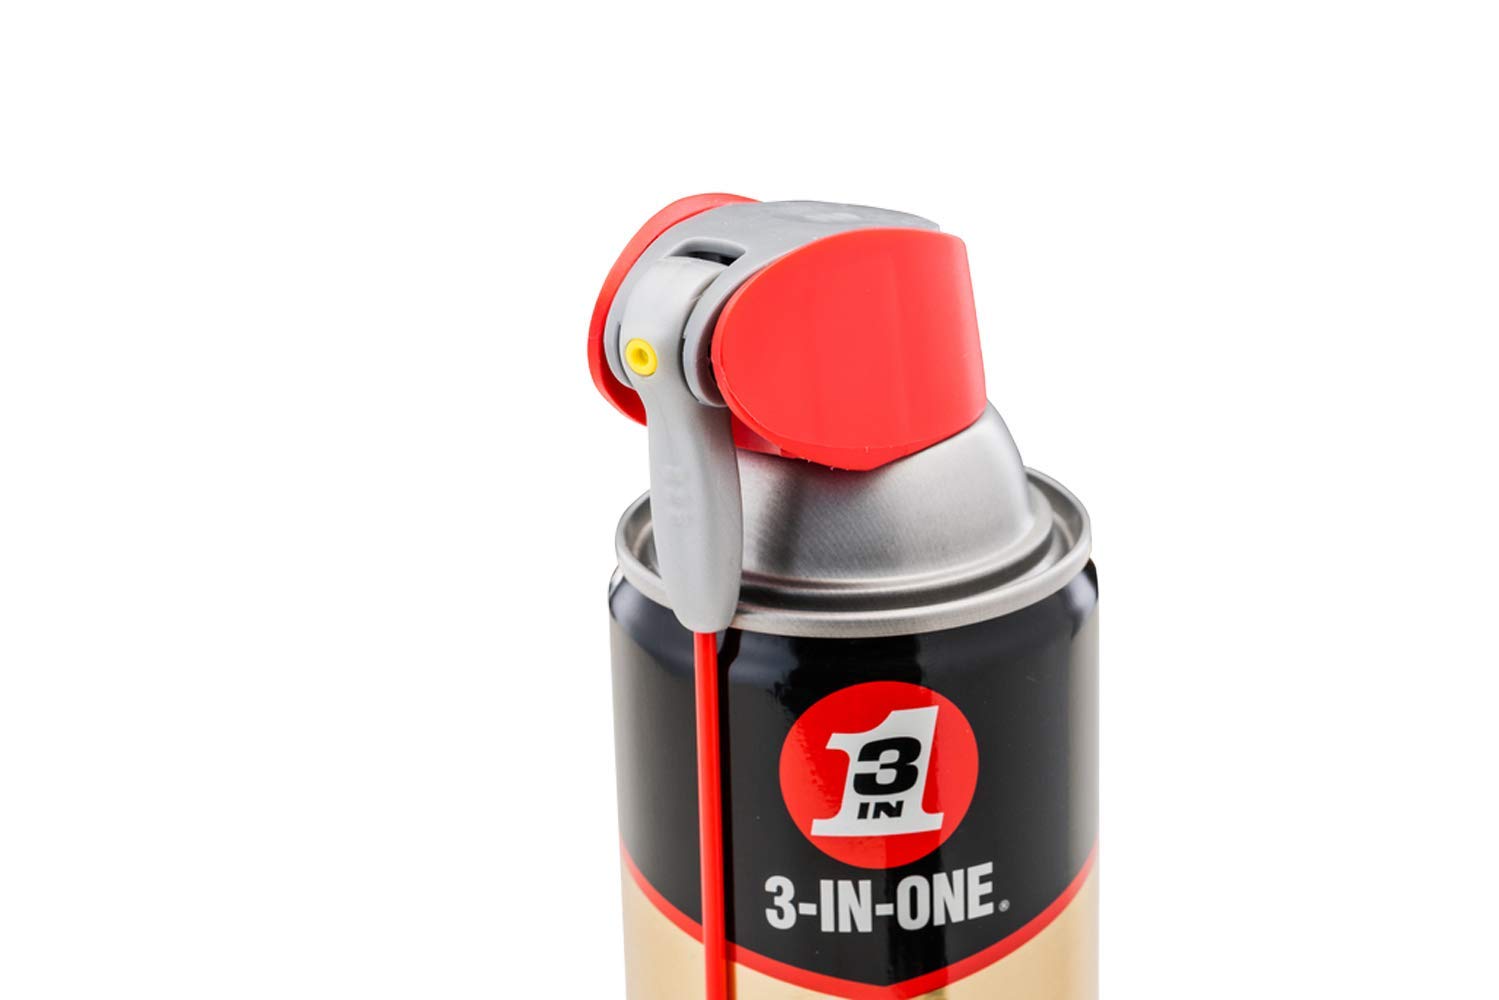 3-IN-ONE Professional Garage Door Lubricant with Smart Straw Sprays 2 Ways, 11 OZ Twin Pack, 100584, Clear